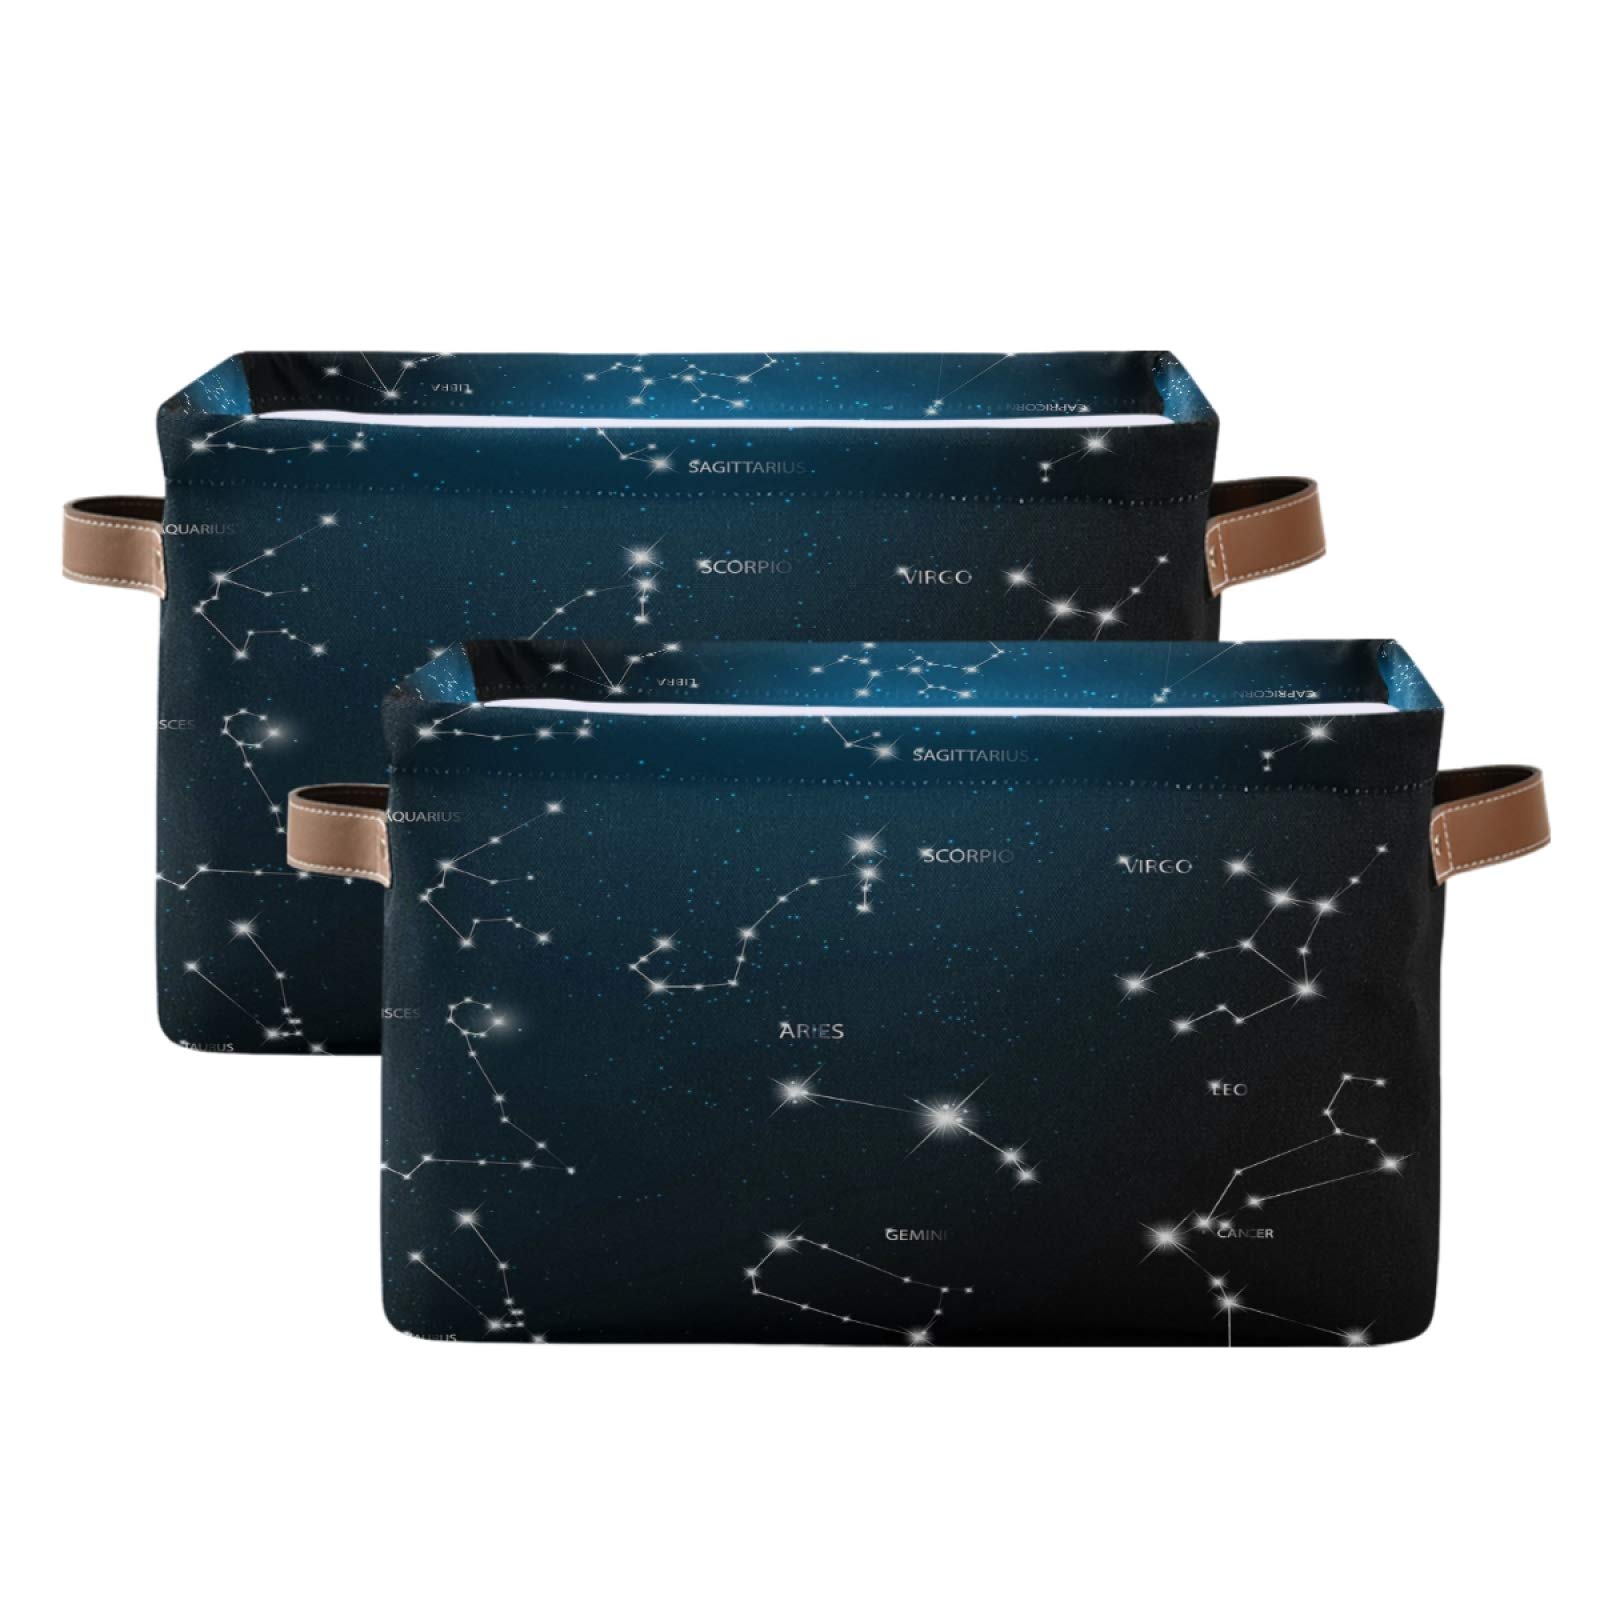 AUUXVA Storage Basket Galaxy Star Space 12 Constellation Storage Cube Box Durable Canvas Collapsible Toy Basket Organizer Bin with Handles for Shelf Closet Bedroom Home Office